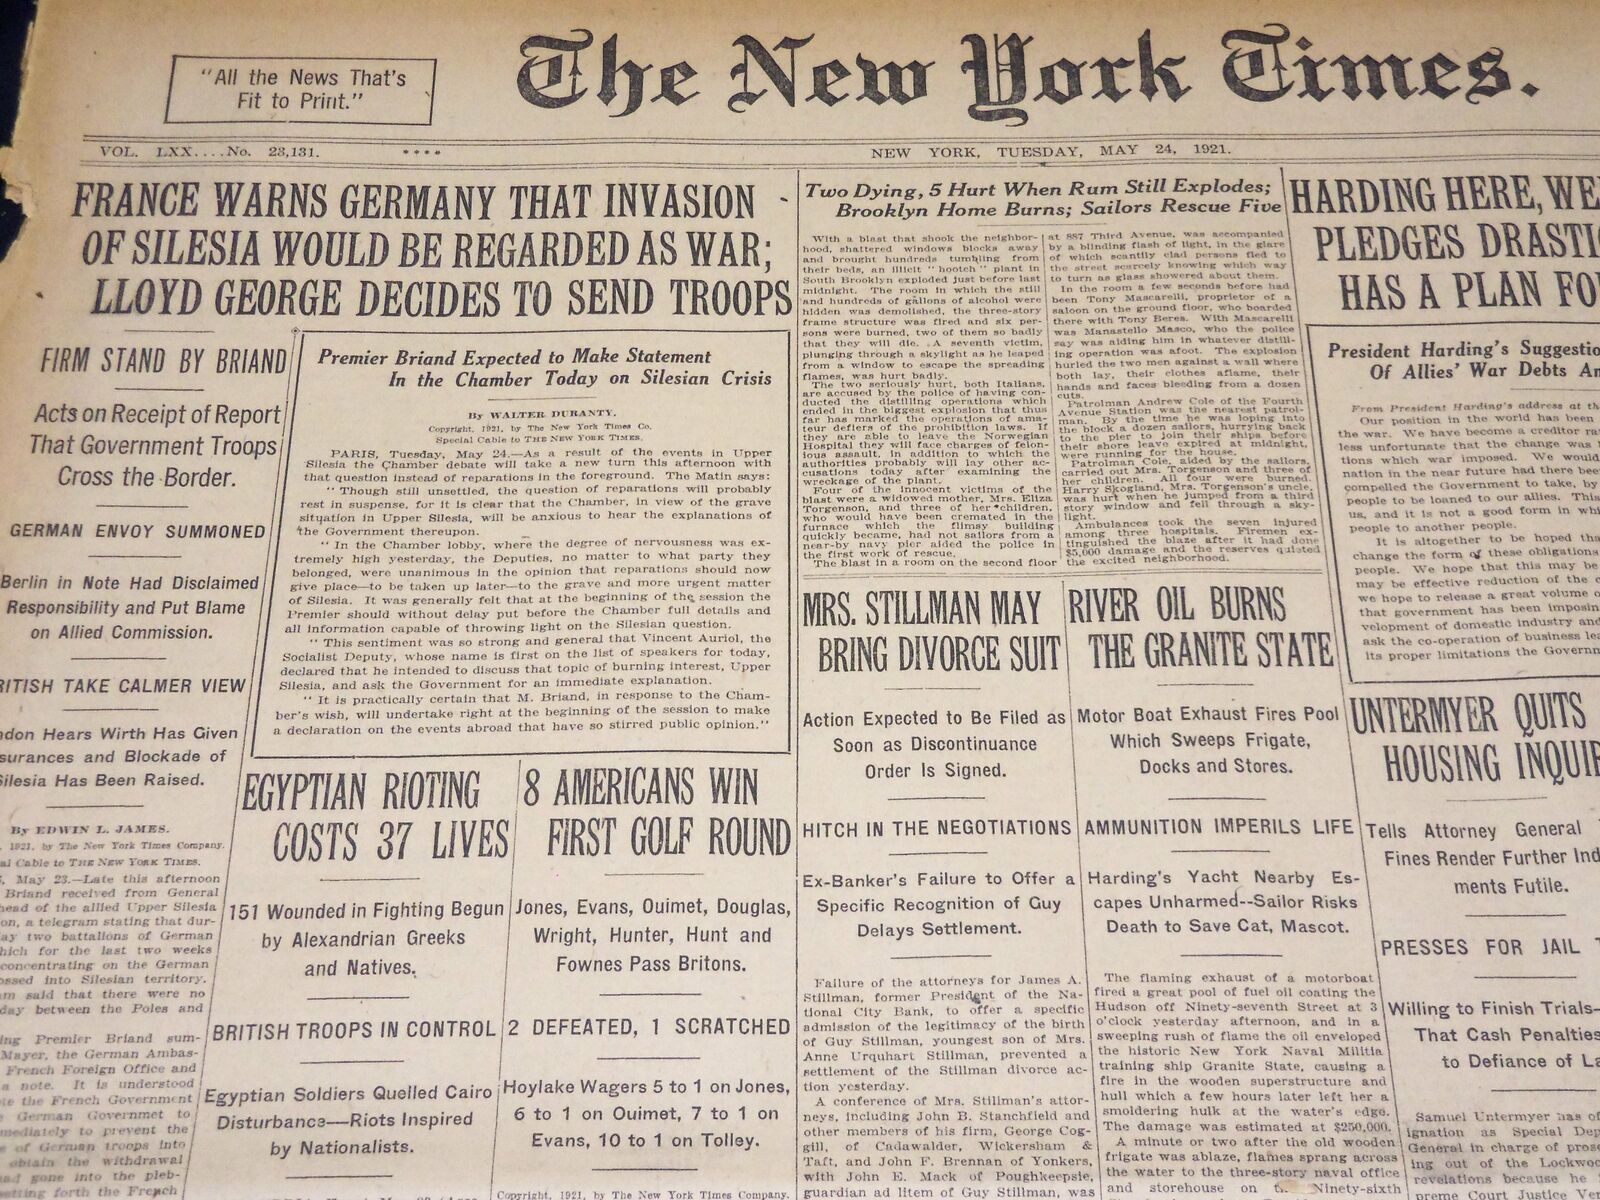 1921 MAY 24 NEW YORK TIMES - 8 AMERICANS WIN FIRST GOLF ROUND - NT 8598